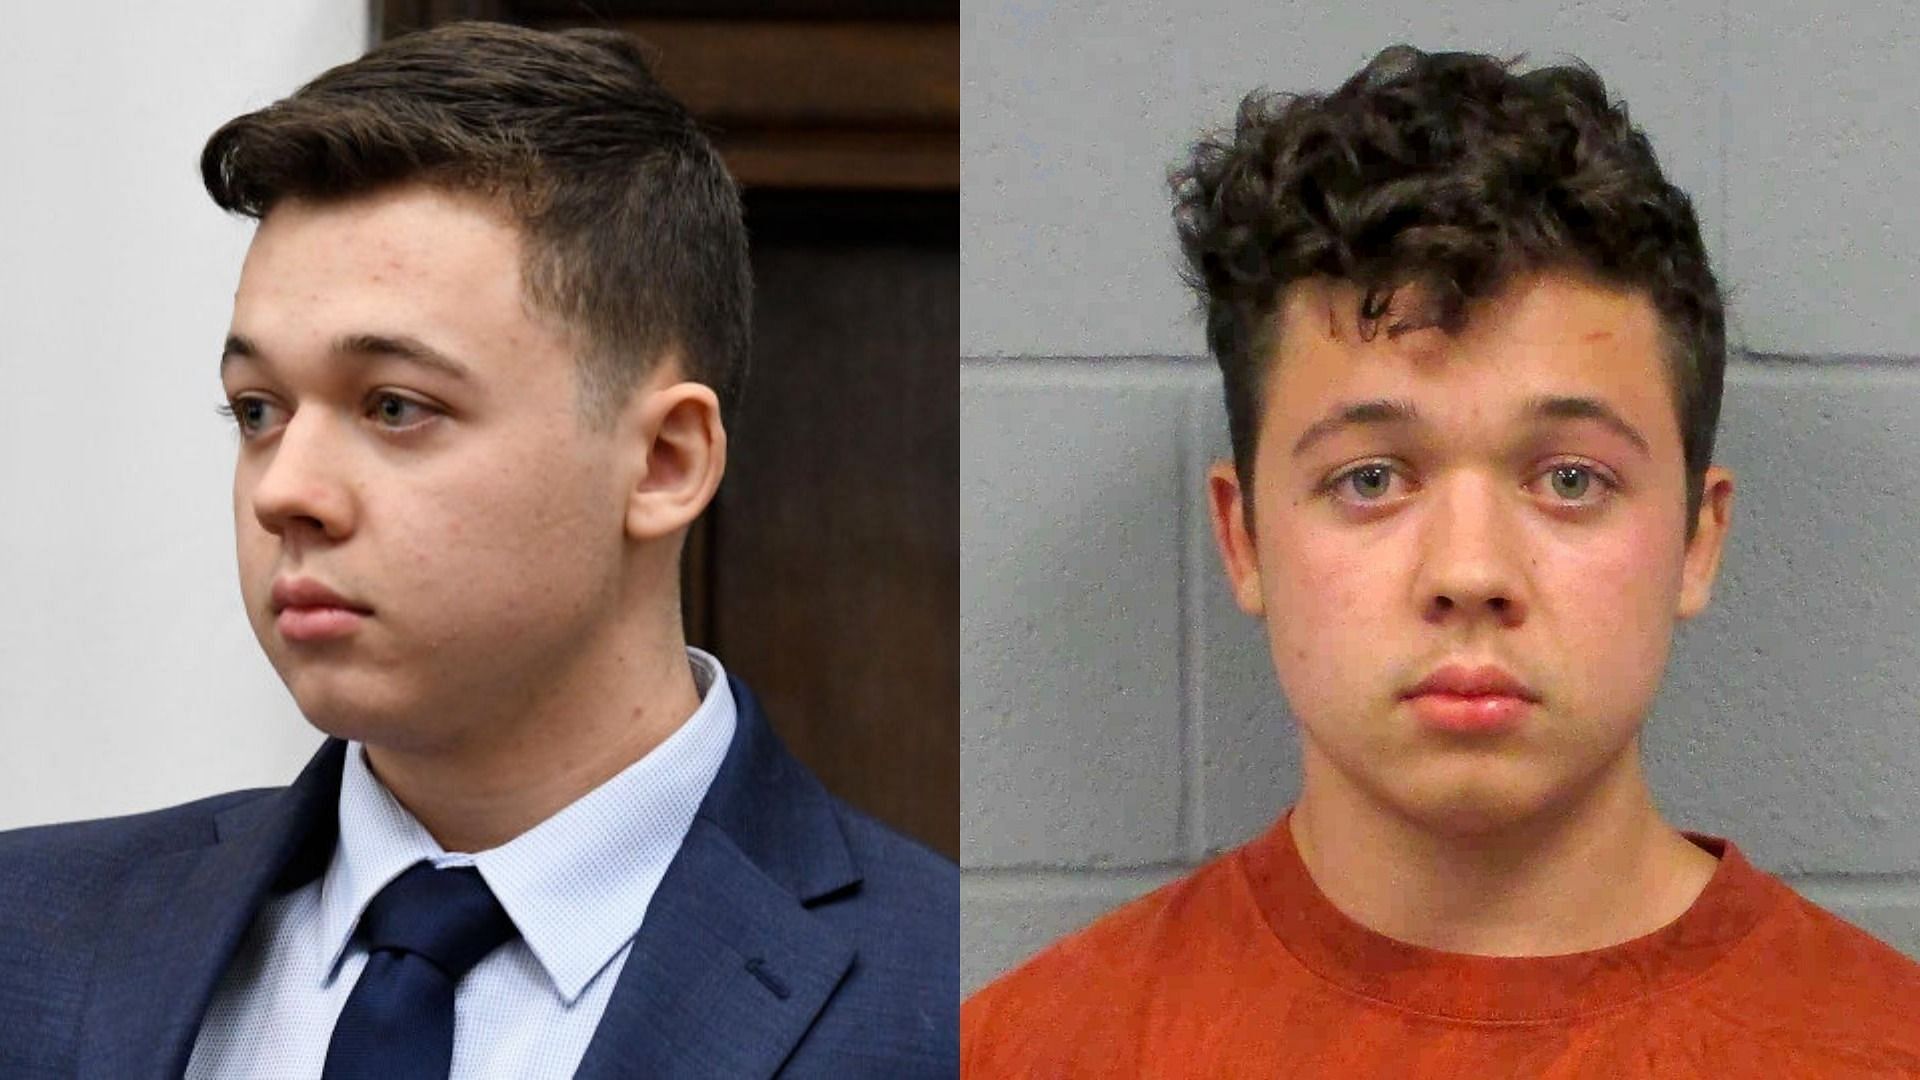 The Kyle Rittenhouse homicide took place on August 25, 2020 (Image via Getty Images)